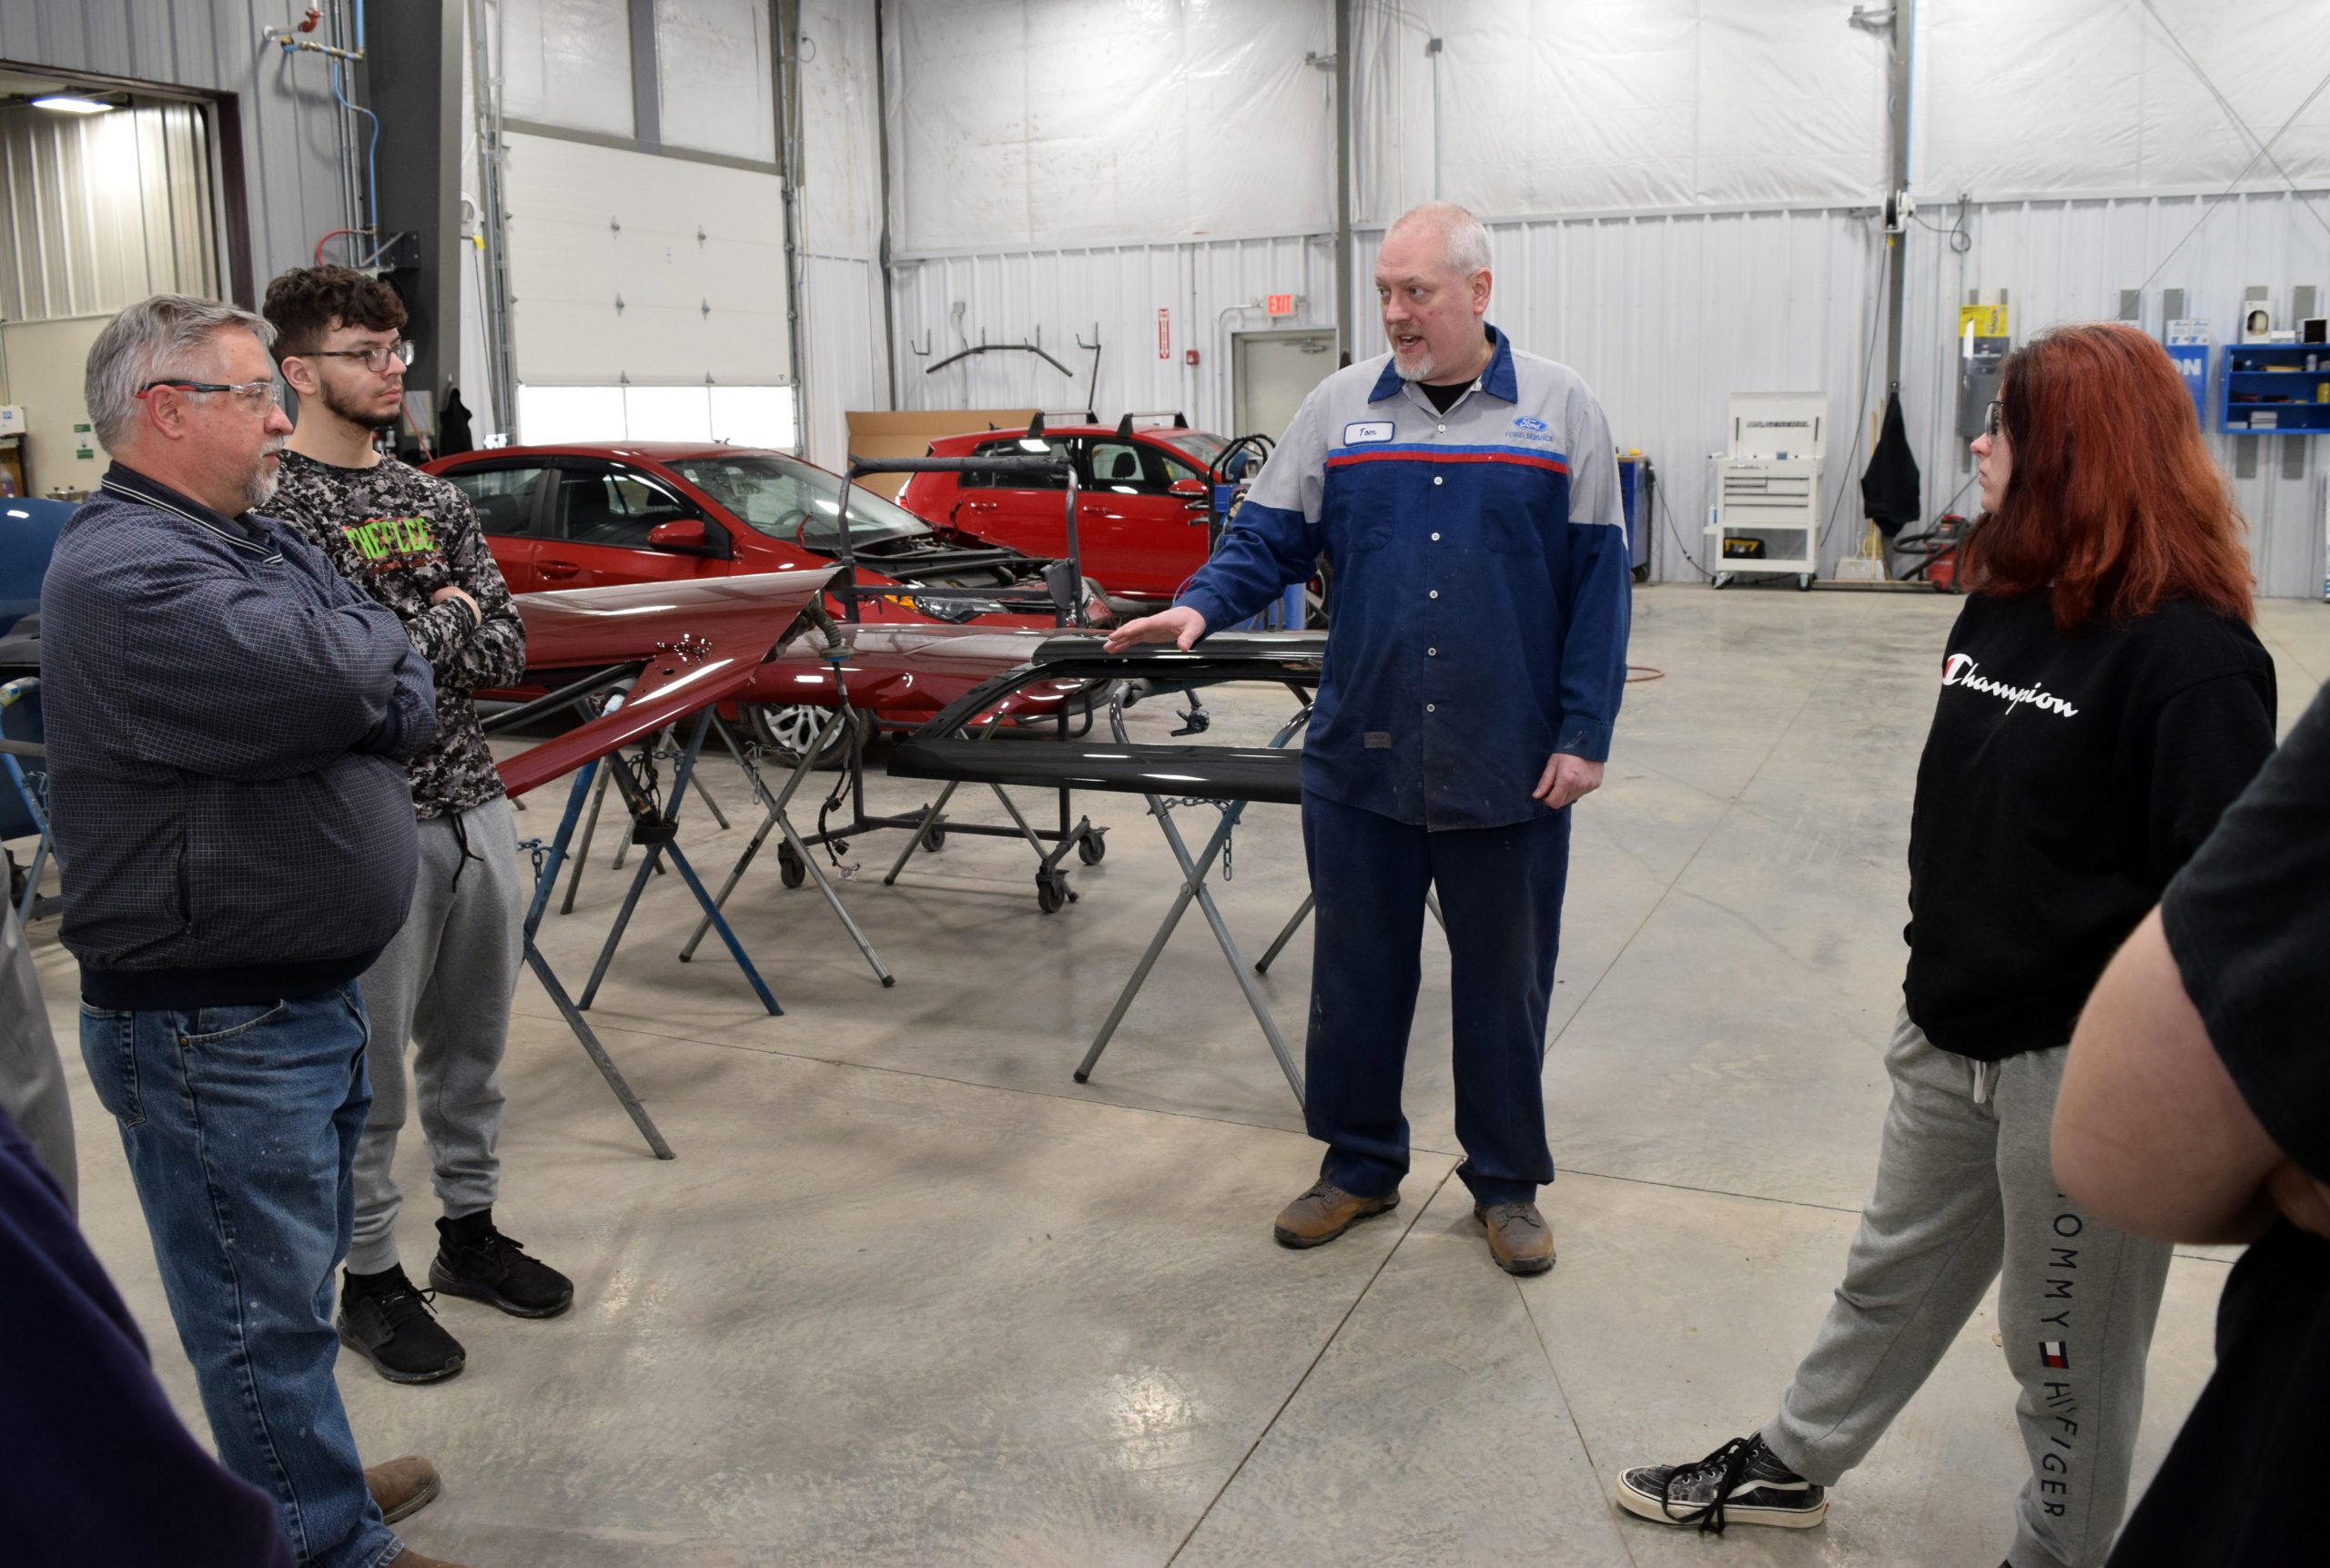 Students stand on the repair floor at Brown's Ford talking with Instructor John Ackermann and Brown's employee Tom Farker